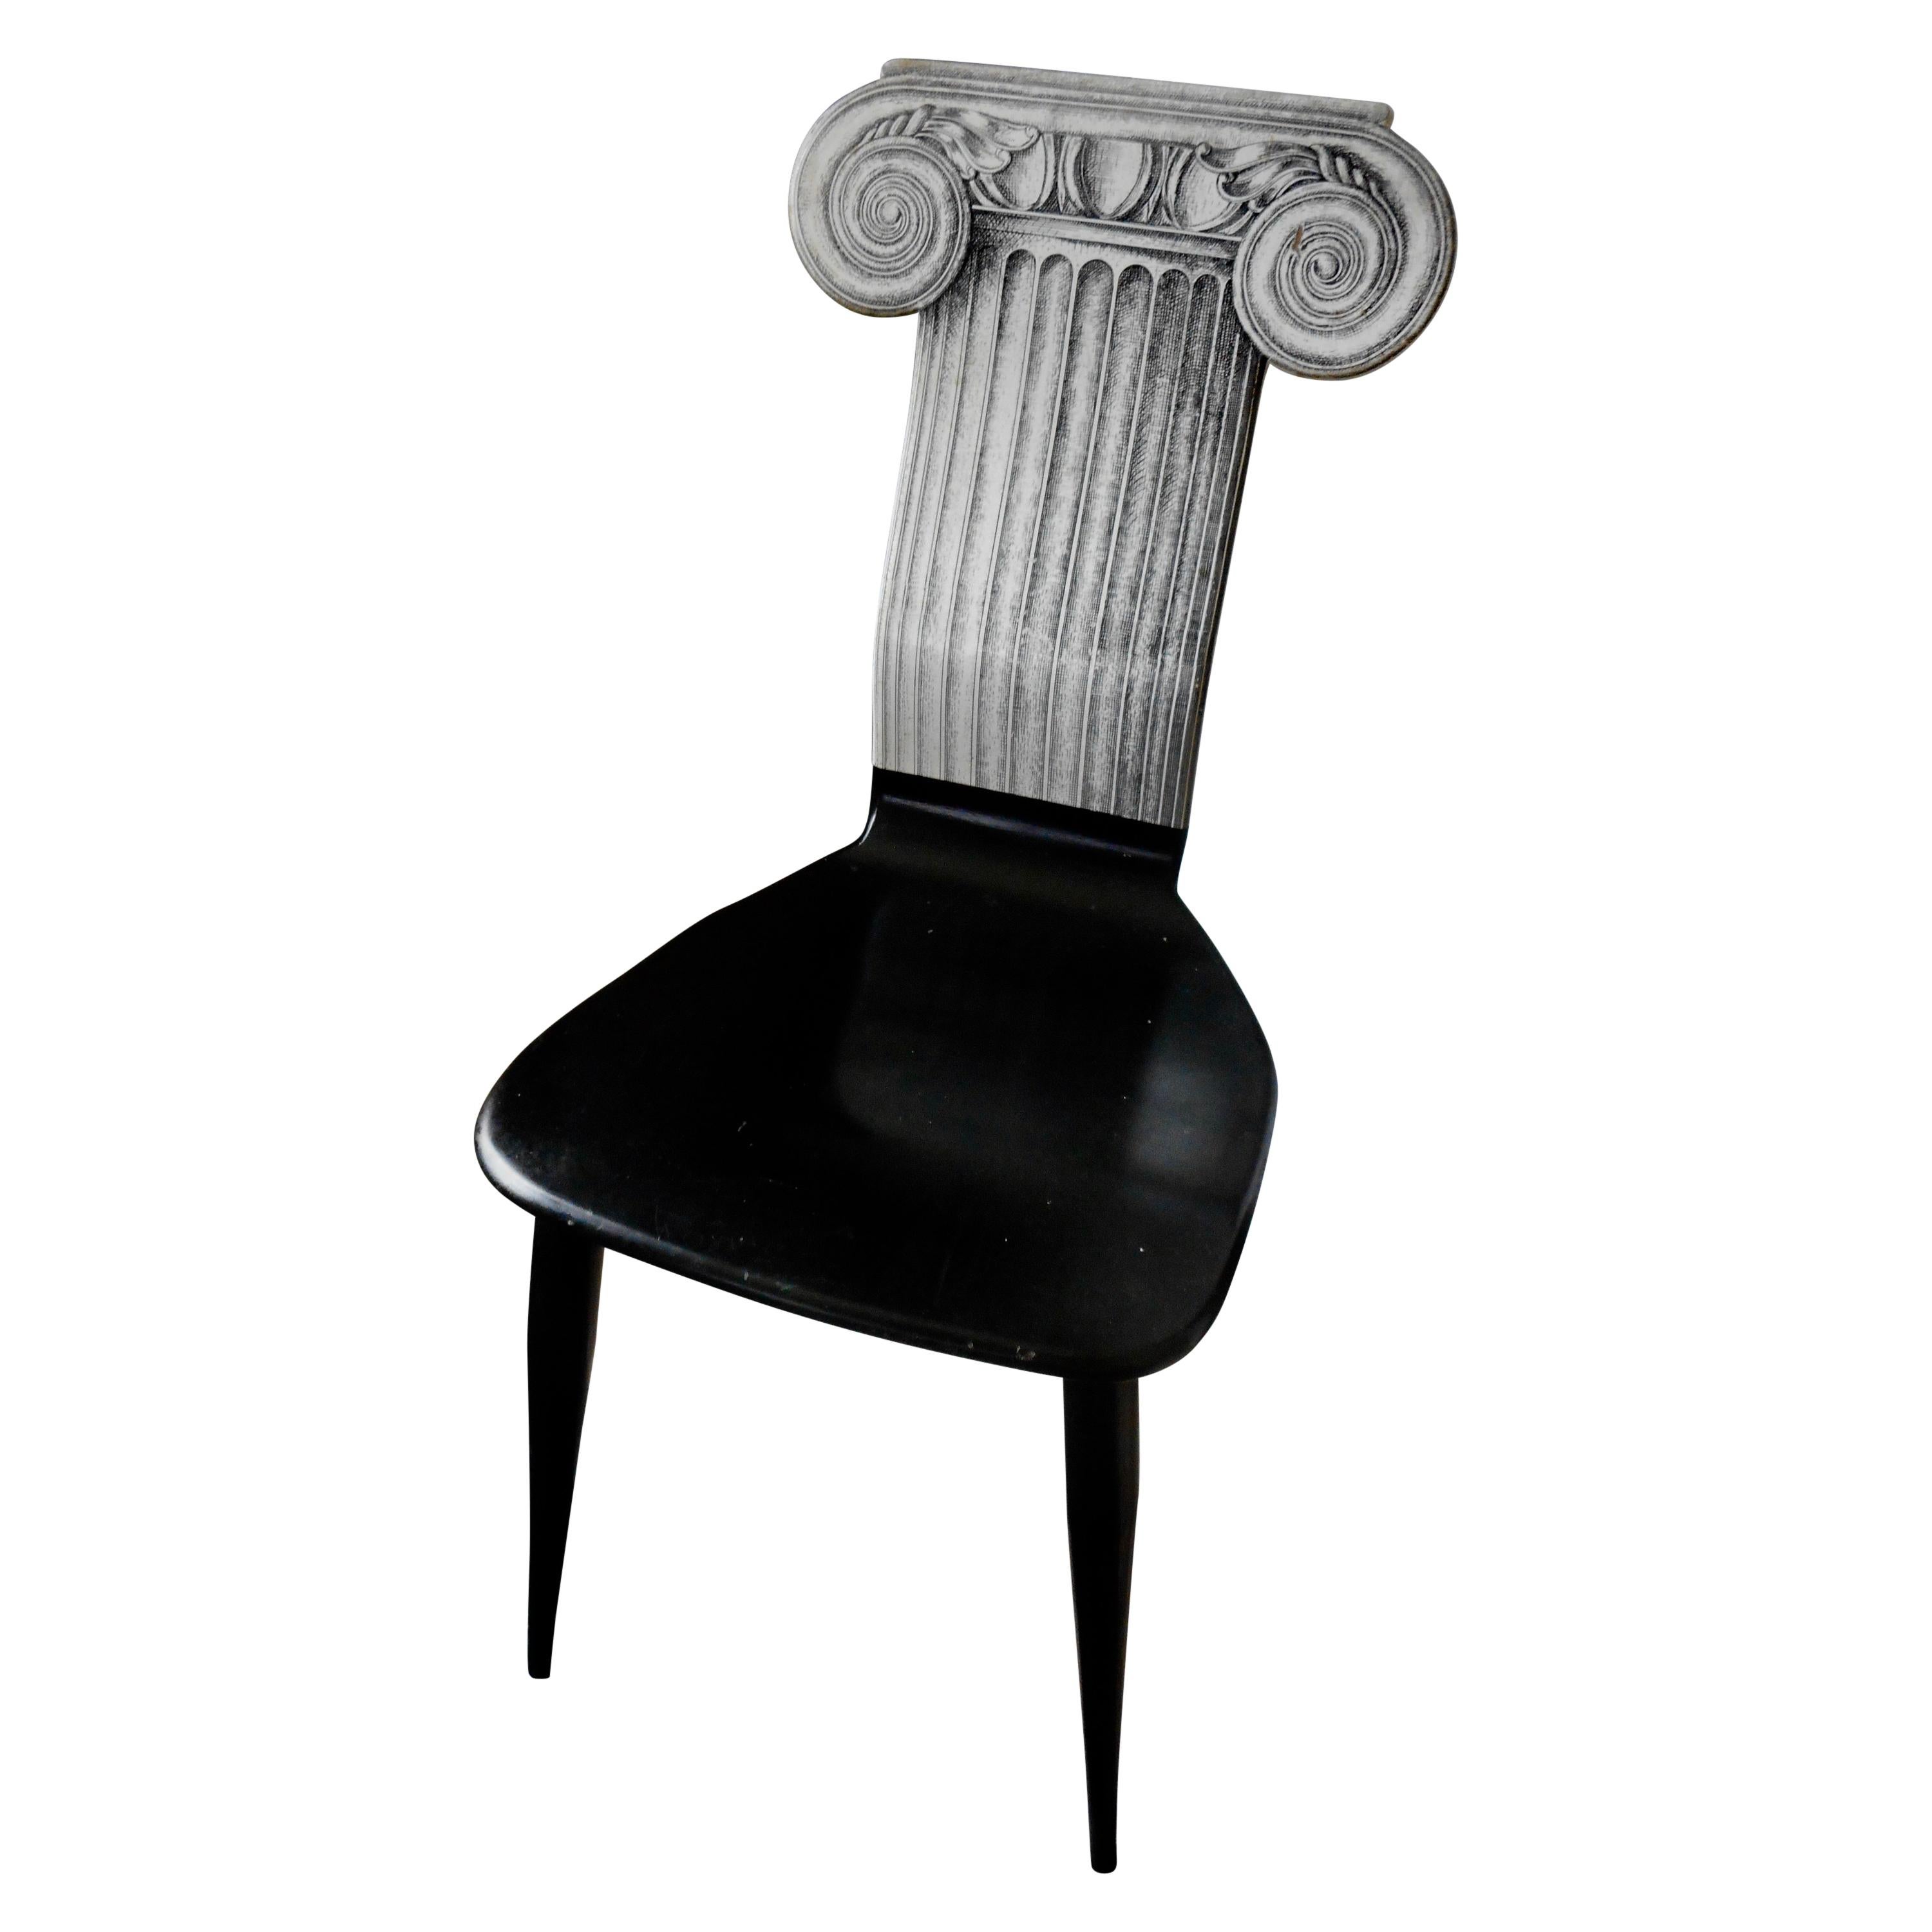 Capitello Chair by Fornasetti, Italy, 1988